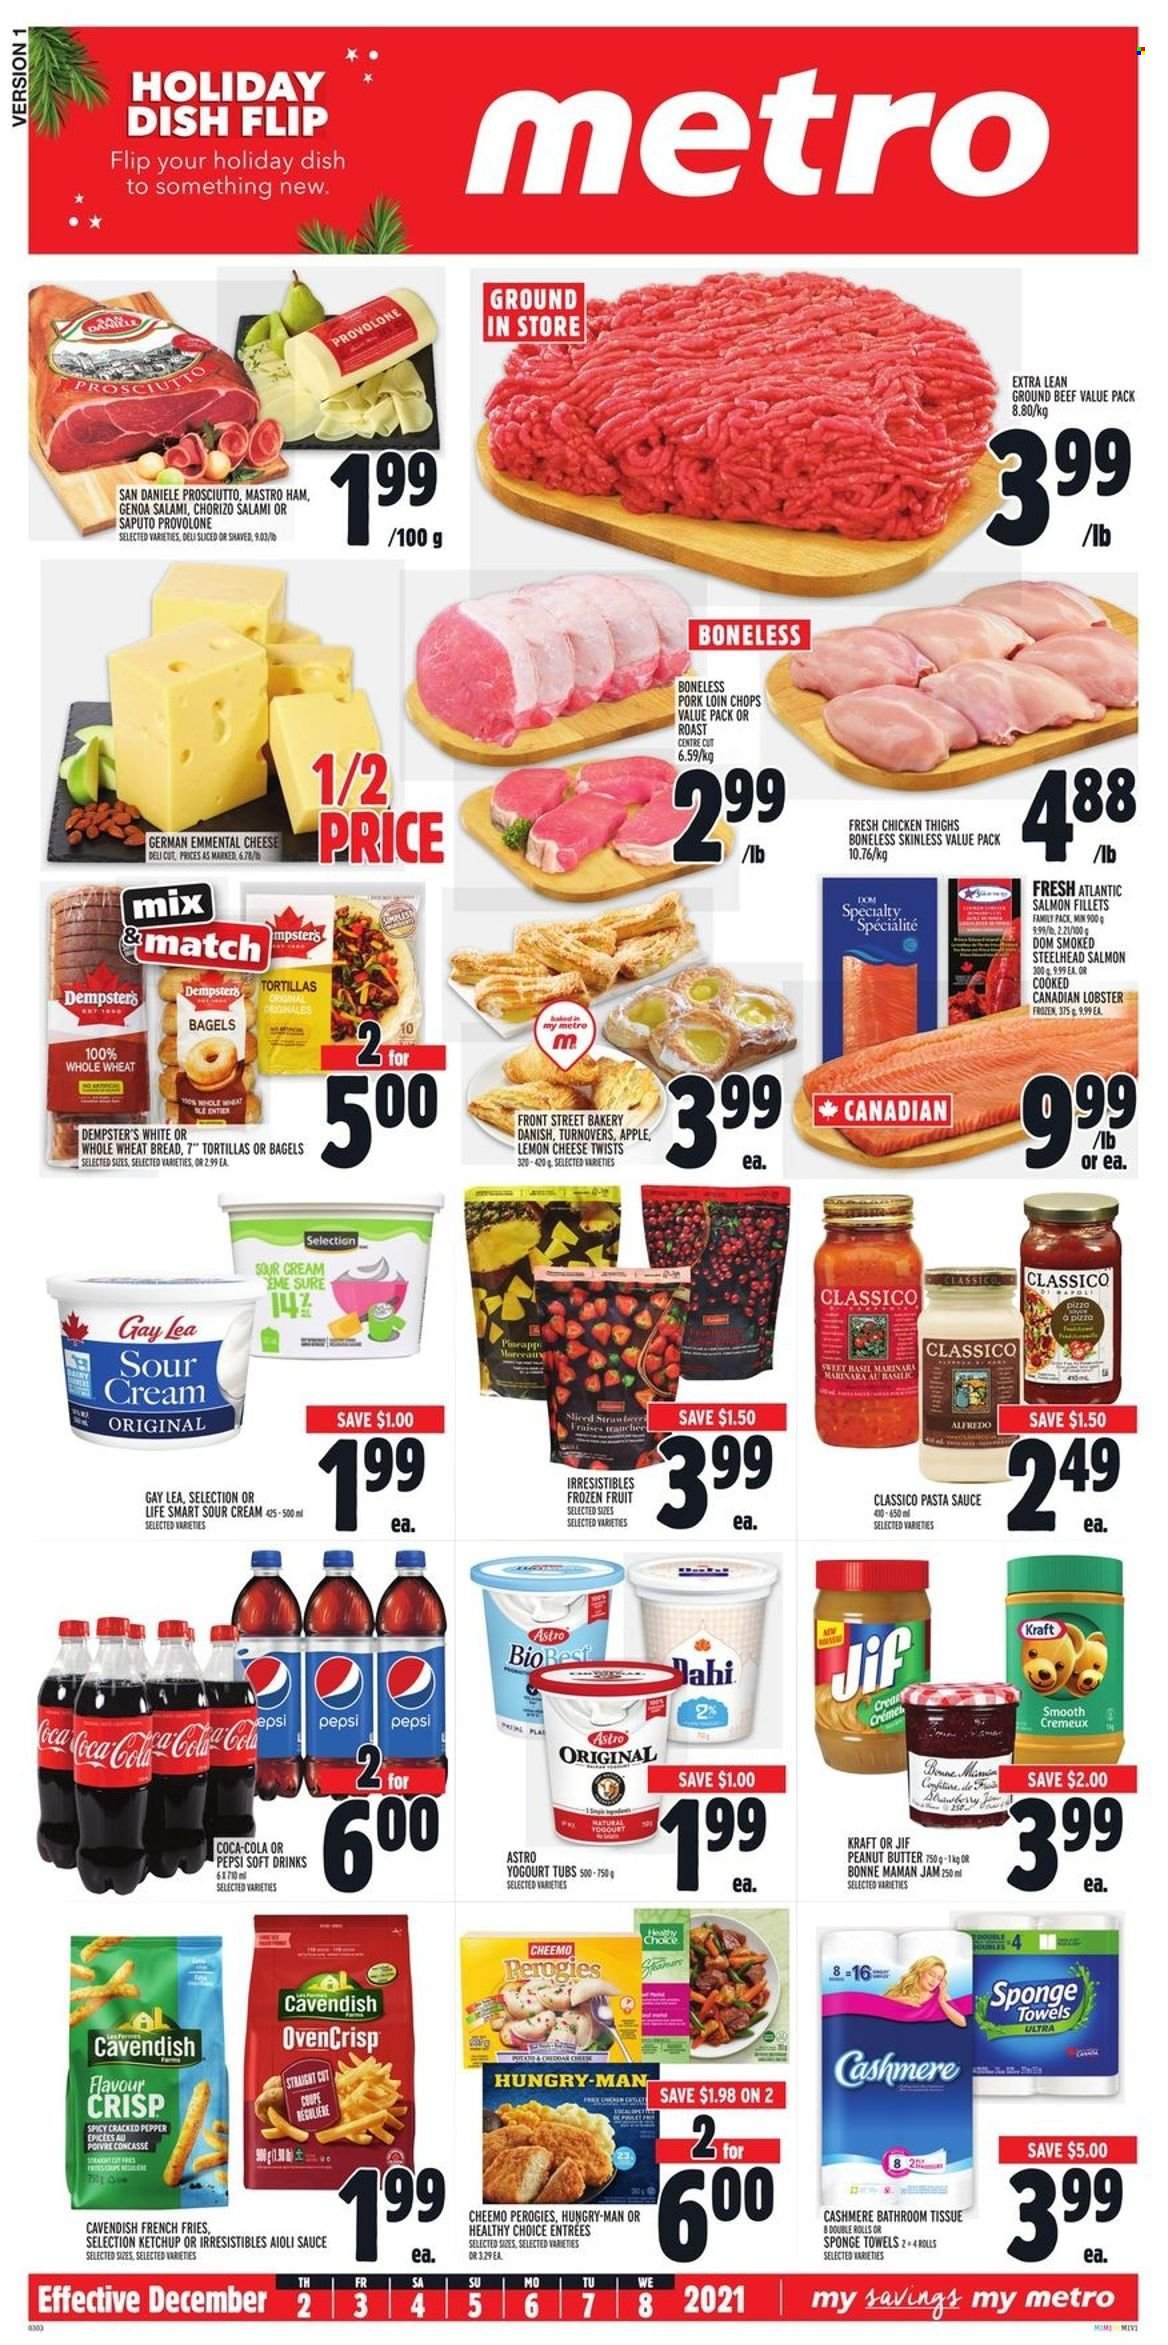 thumbnail - Metro Flyer - December 02, 2021 - December 08, 2021 - Sales products - bagels, tortillas, wheat bread, turnovers, lobster, salmon, salmon fillet, pasta sauce, sauce, Healthy Choice, Kraft®, salami, ham, prosciutto, cheese, Provolone, sour cream, potato fries, french fries, pepper, Classico, fruit jam, peanut butter, Jif, Coca-Cola, Pepsi, soft drink, chicken thighs, chicken, beef meat, ground beef, pork chops, pork loin, pork meat, bath tissue, Sure, sponge, towel, ketchup, chorizo. Page 1.